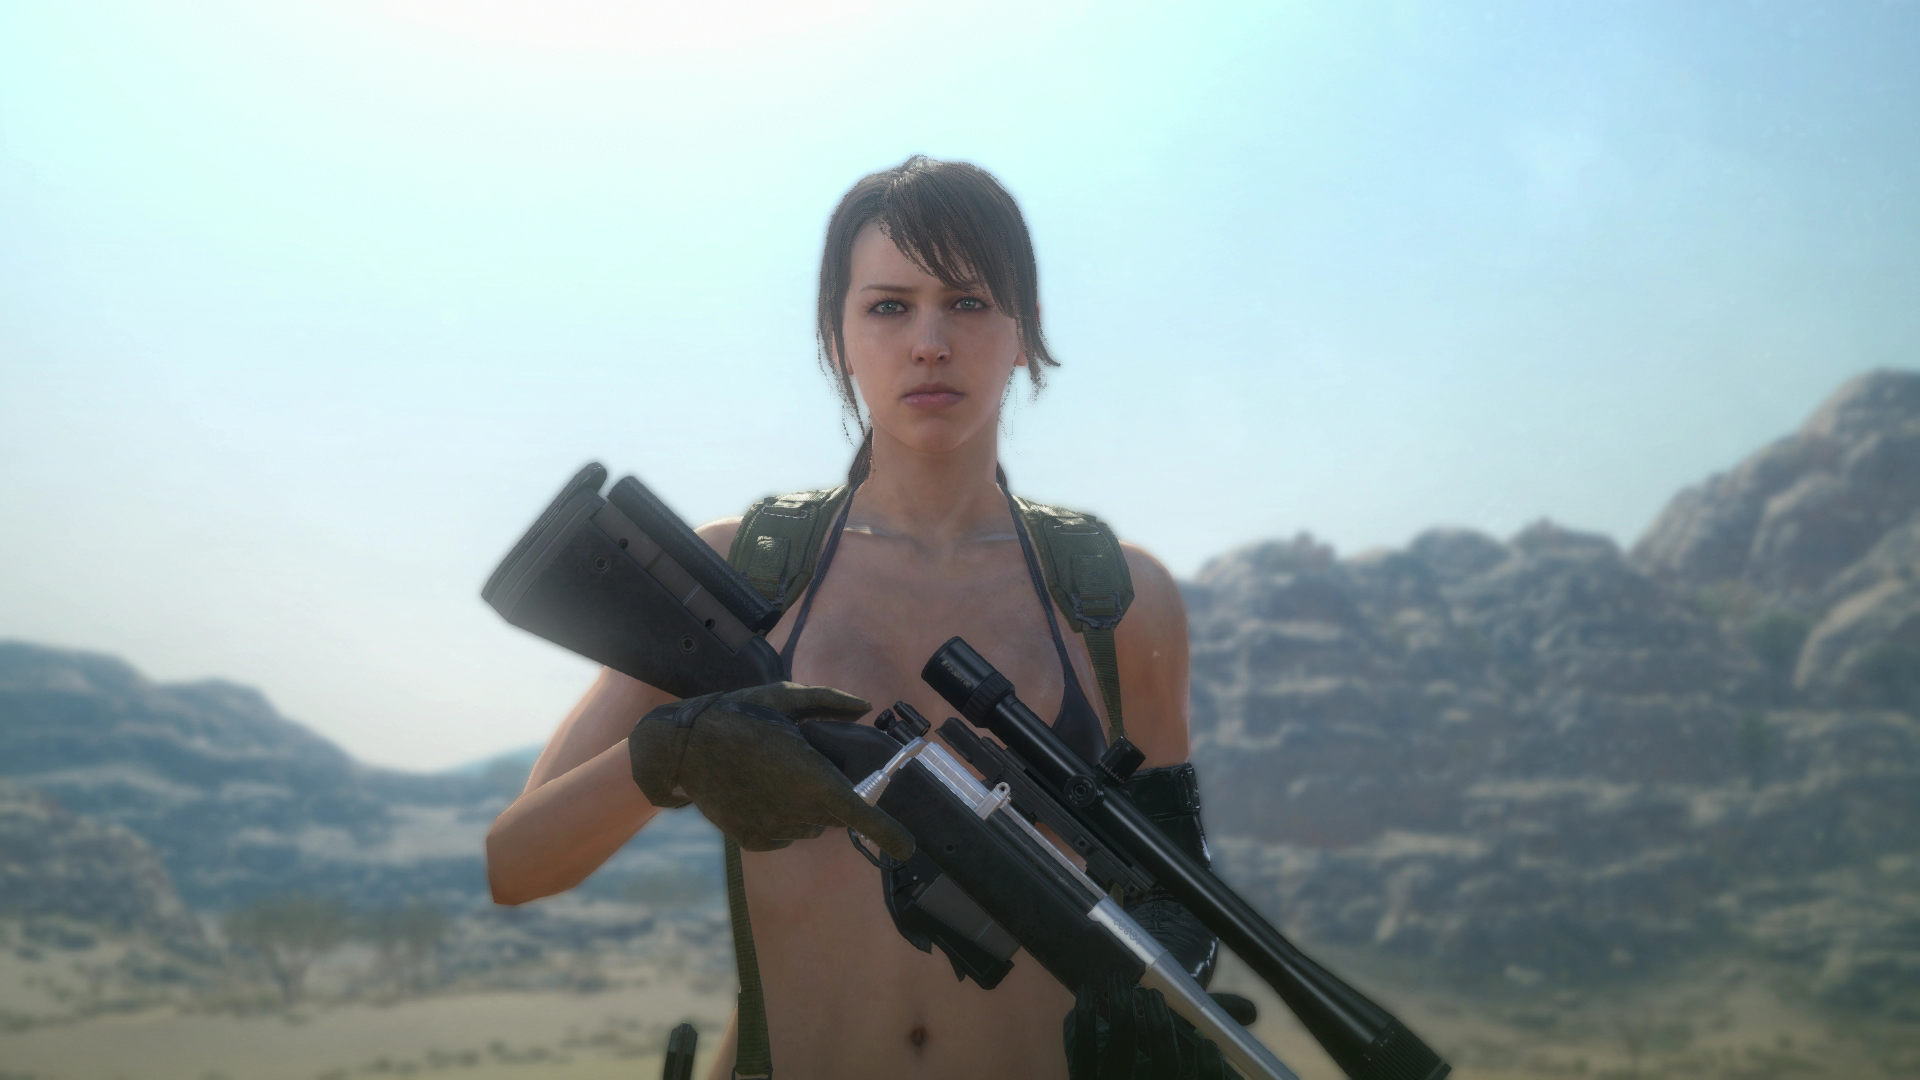 Review: Metal Gear Solid 5 is cliched, confused, and utterly